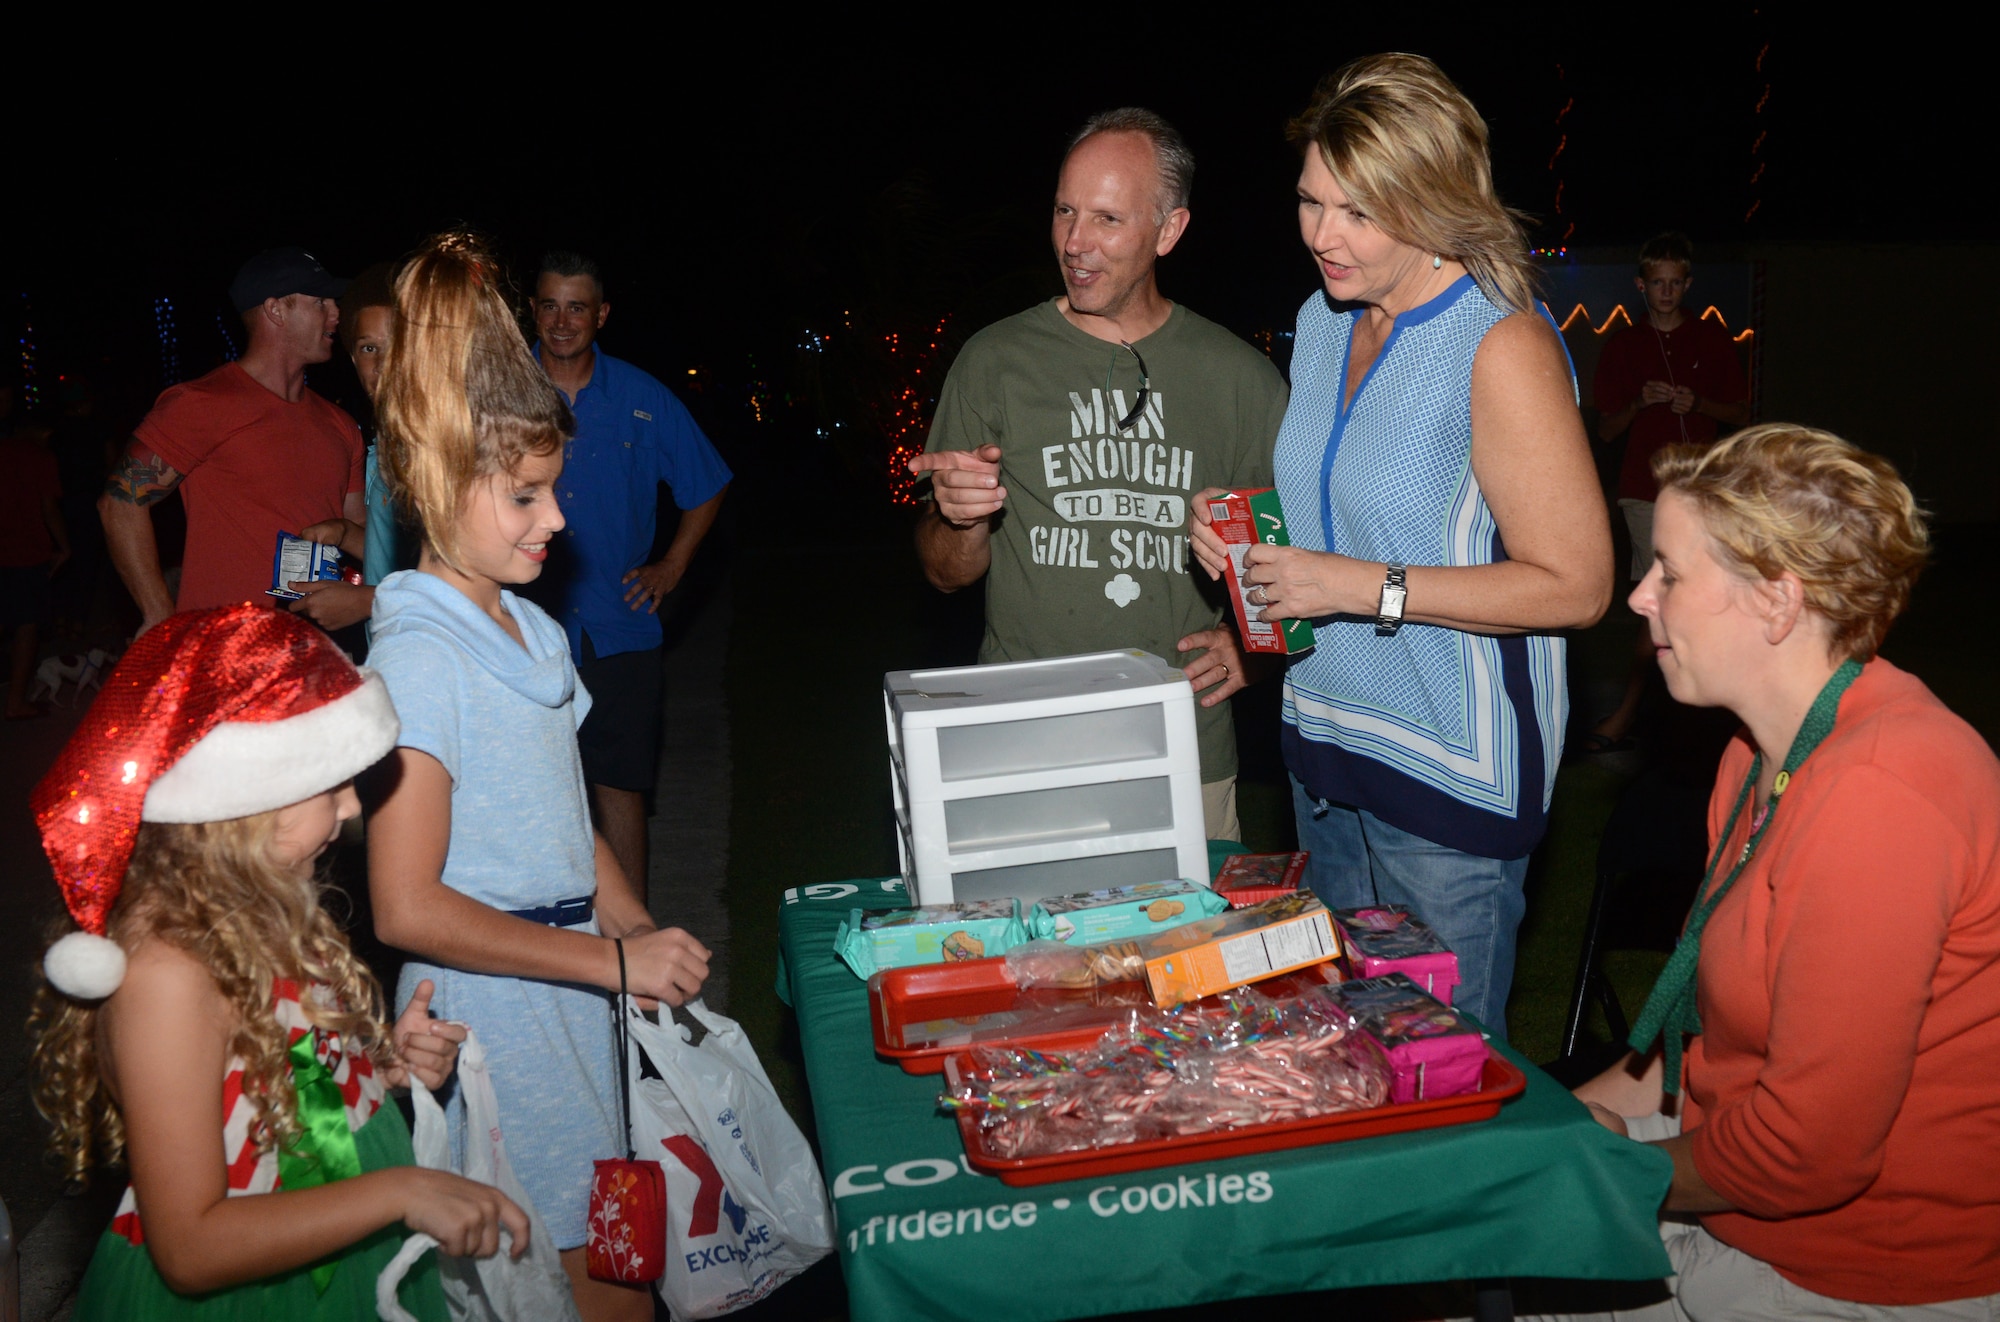 Children receive candy at the Girl Scouts booth during the annual Rota Walk Dec. 12, 2015, at Andersen Air Force Base, Guam. Candy and other prizes were handed out to Rota Walk attendees during the event. (U.S. Air Force photo/Airman 1st Class Arielle Vasquez)